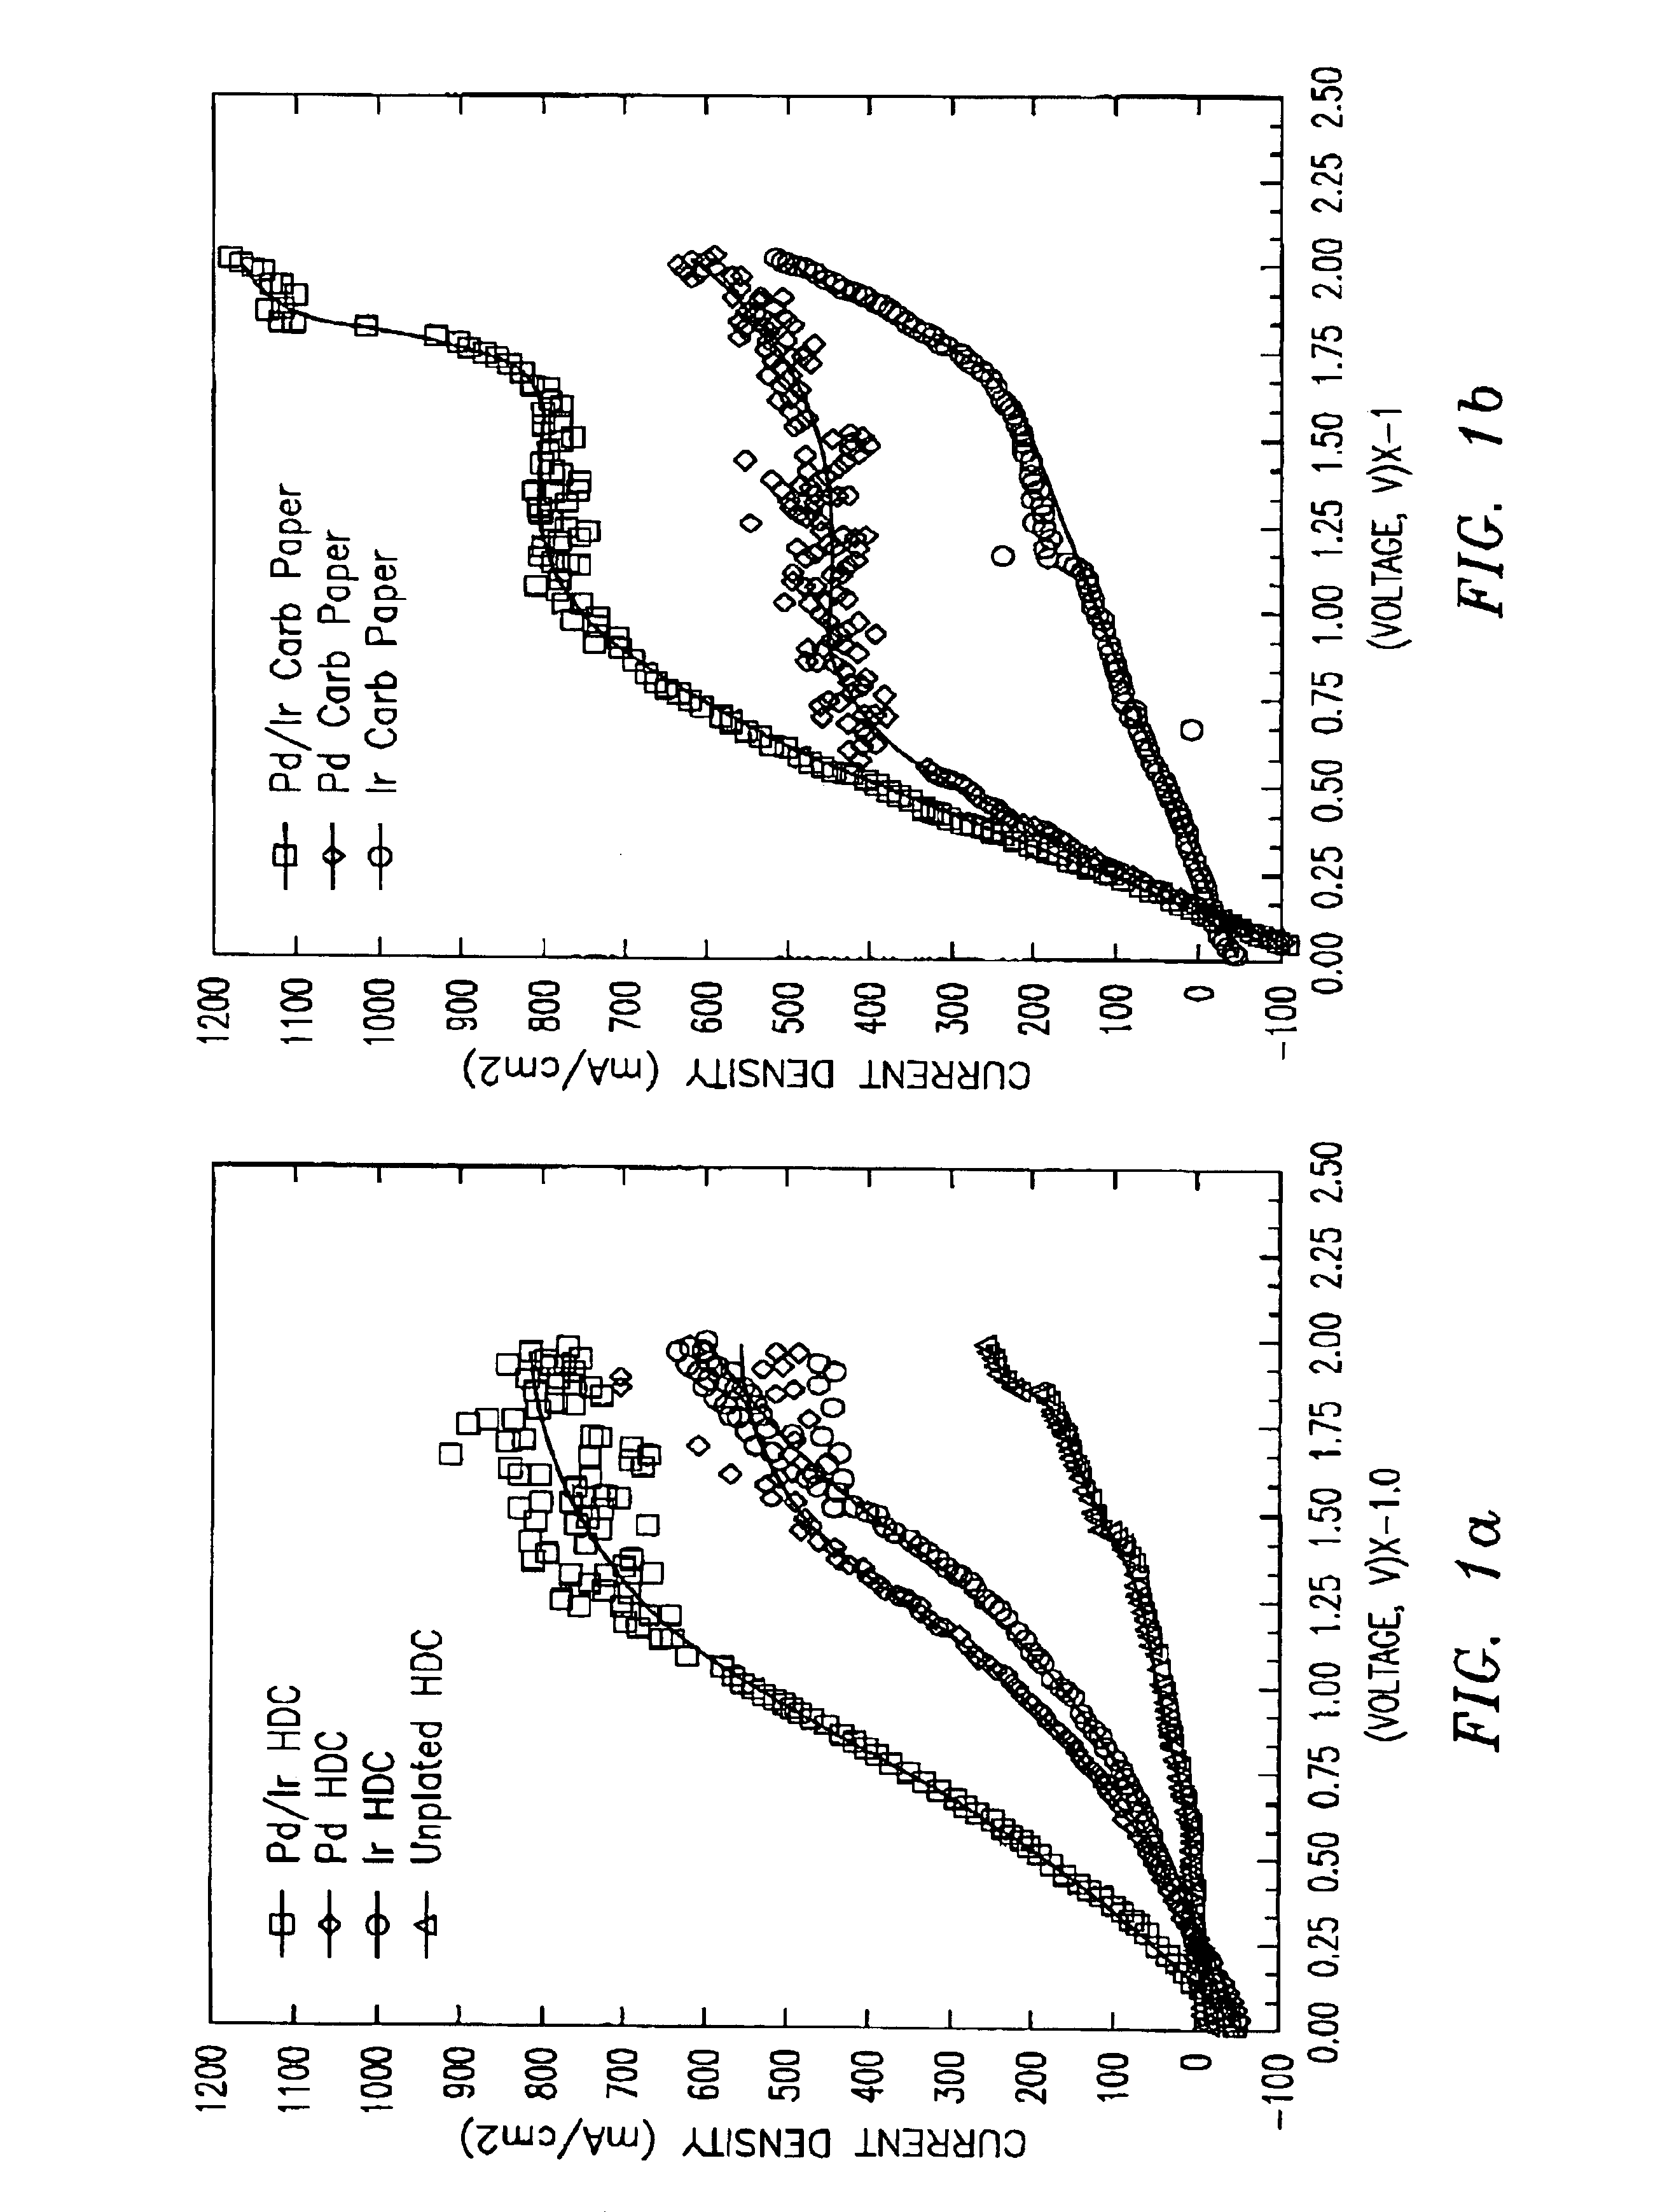 Electrocatalytic cathode device of palladium and iridium on a high density or porous carbon support and a method for making such a cathode